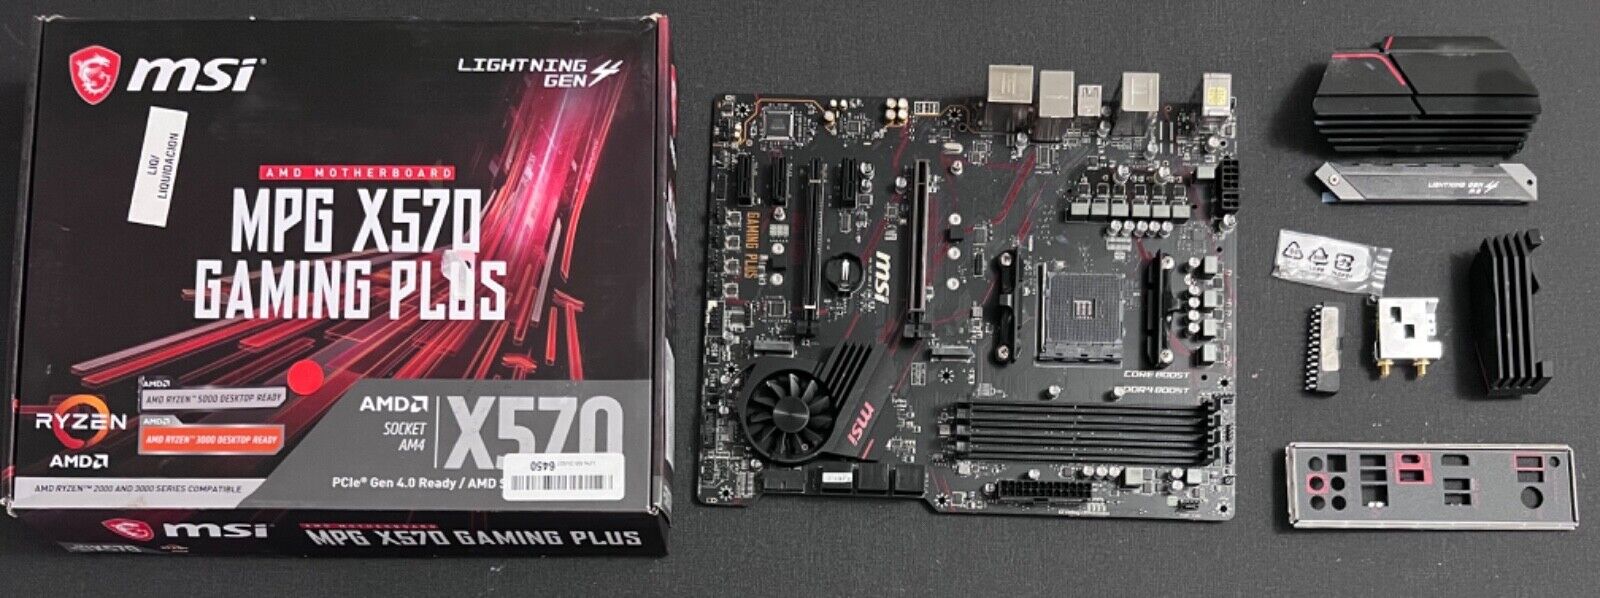 As-is Untested MSI MPG X570 Gaming Plus AMD AM4 ATX Motherboard